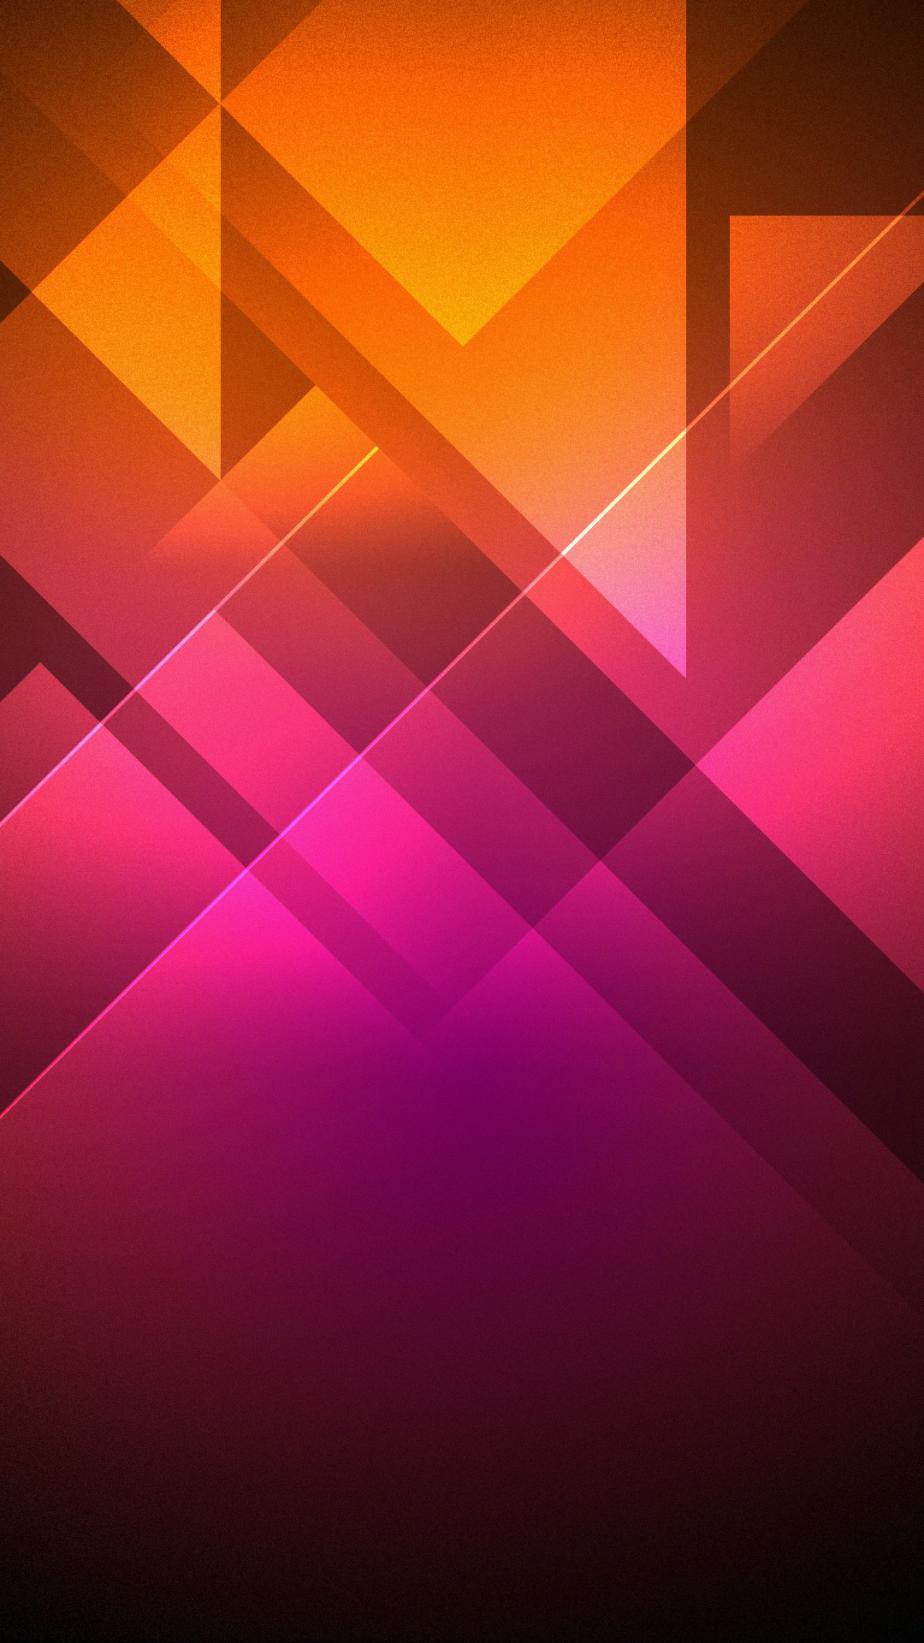 Htc wallpapers